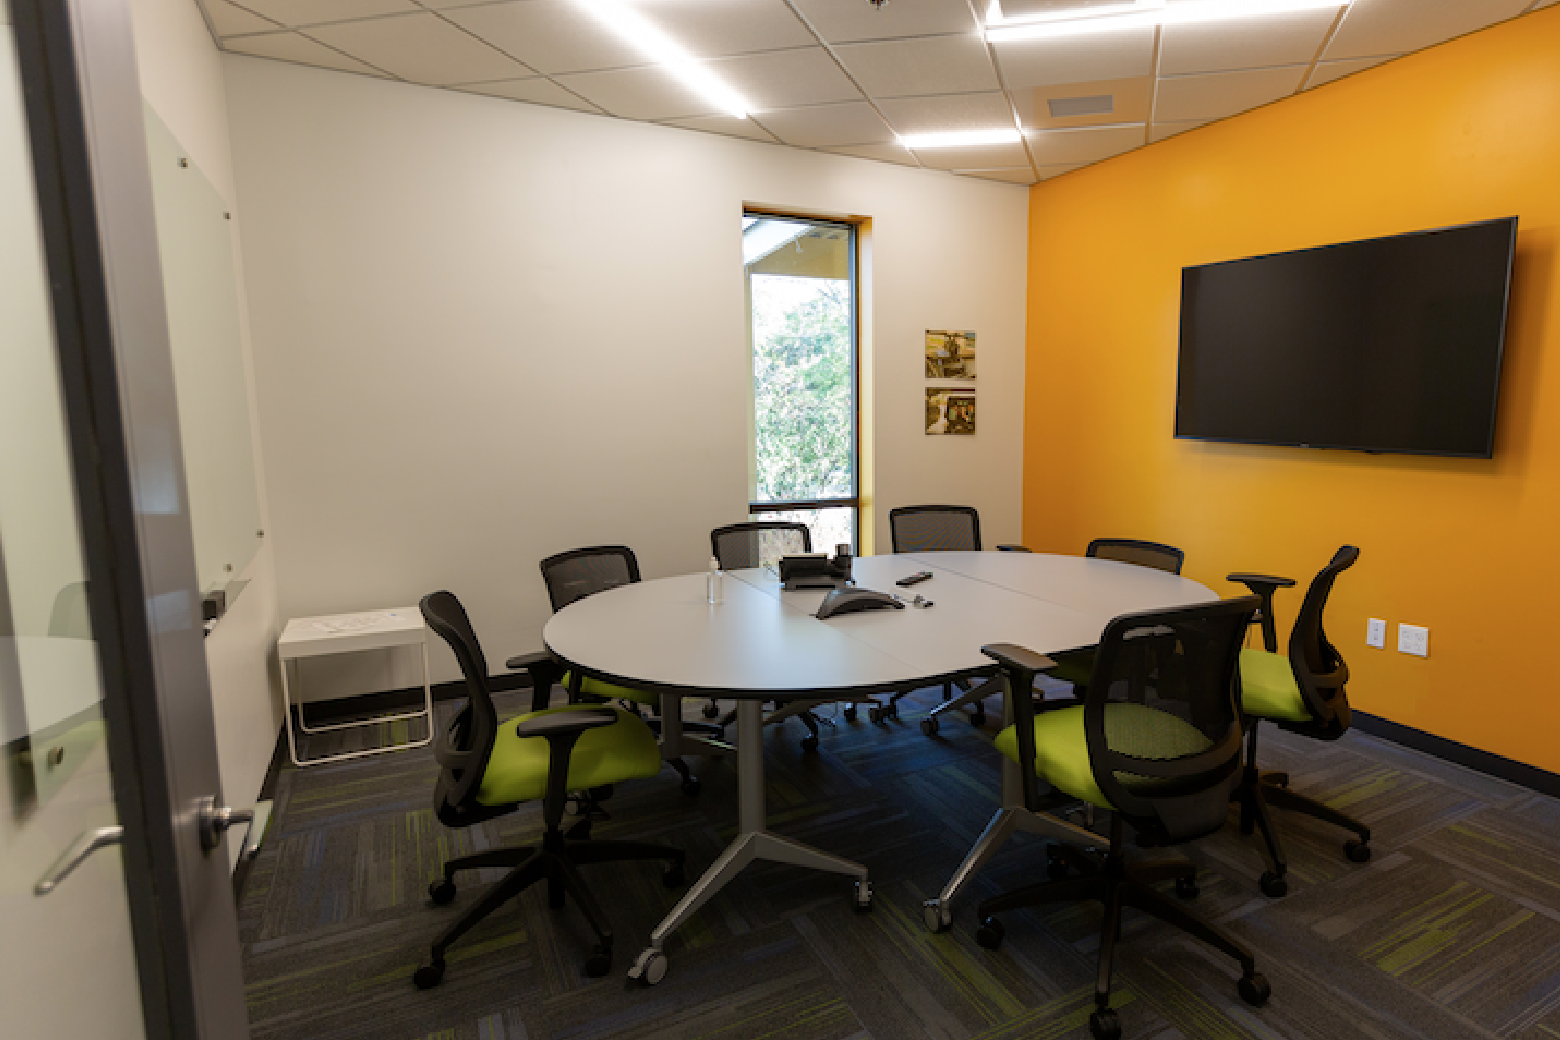 The production offices & conference rooms at (add)ventures EPIC HQ.